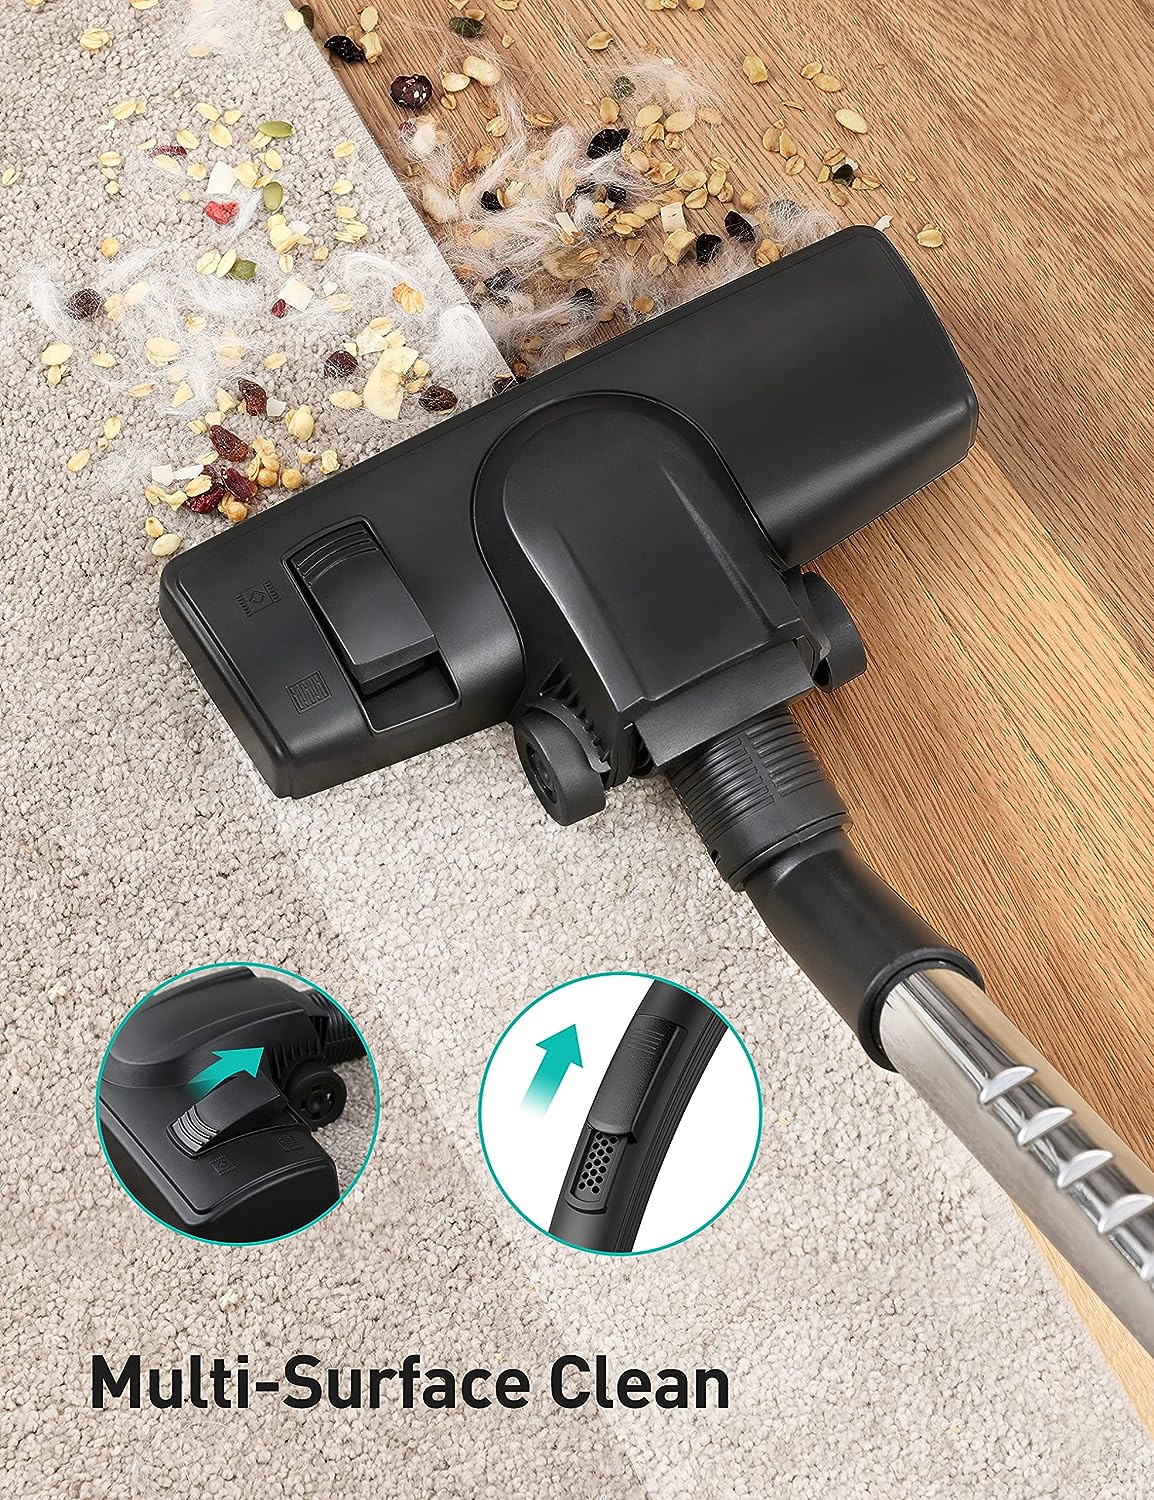 https://bigbigmart.com/wp-content/uploads/2023/09/Canister-Vacuum-Cleaner-Aspiron-Lightweight-Bagless-Vacuum-Cleaner-3.7QT-Large-Dust-Cup-Automatic-Cord-Rewind-5-Tools-HEPA-Filter-Variable-Speed-Portable-Vacuum-for-Hard-Floors-Pet-Car-Silver2.jpg